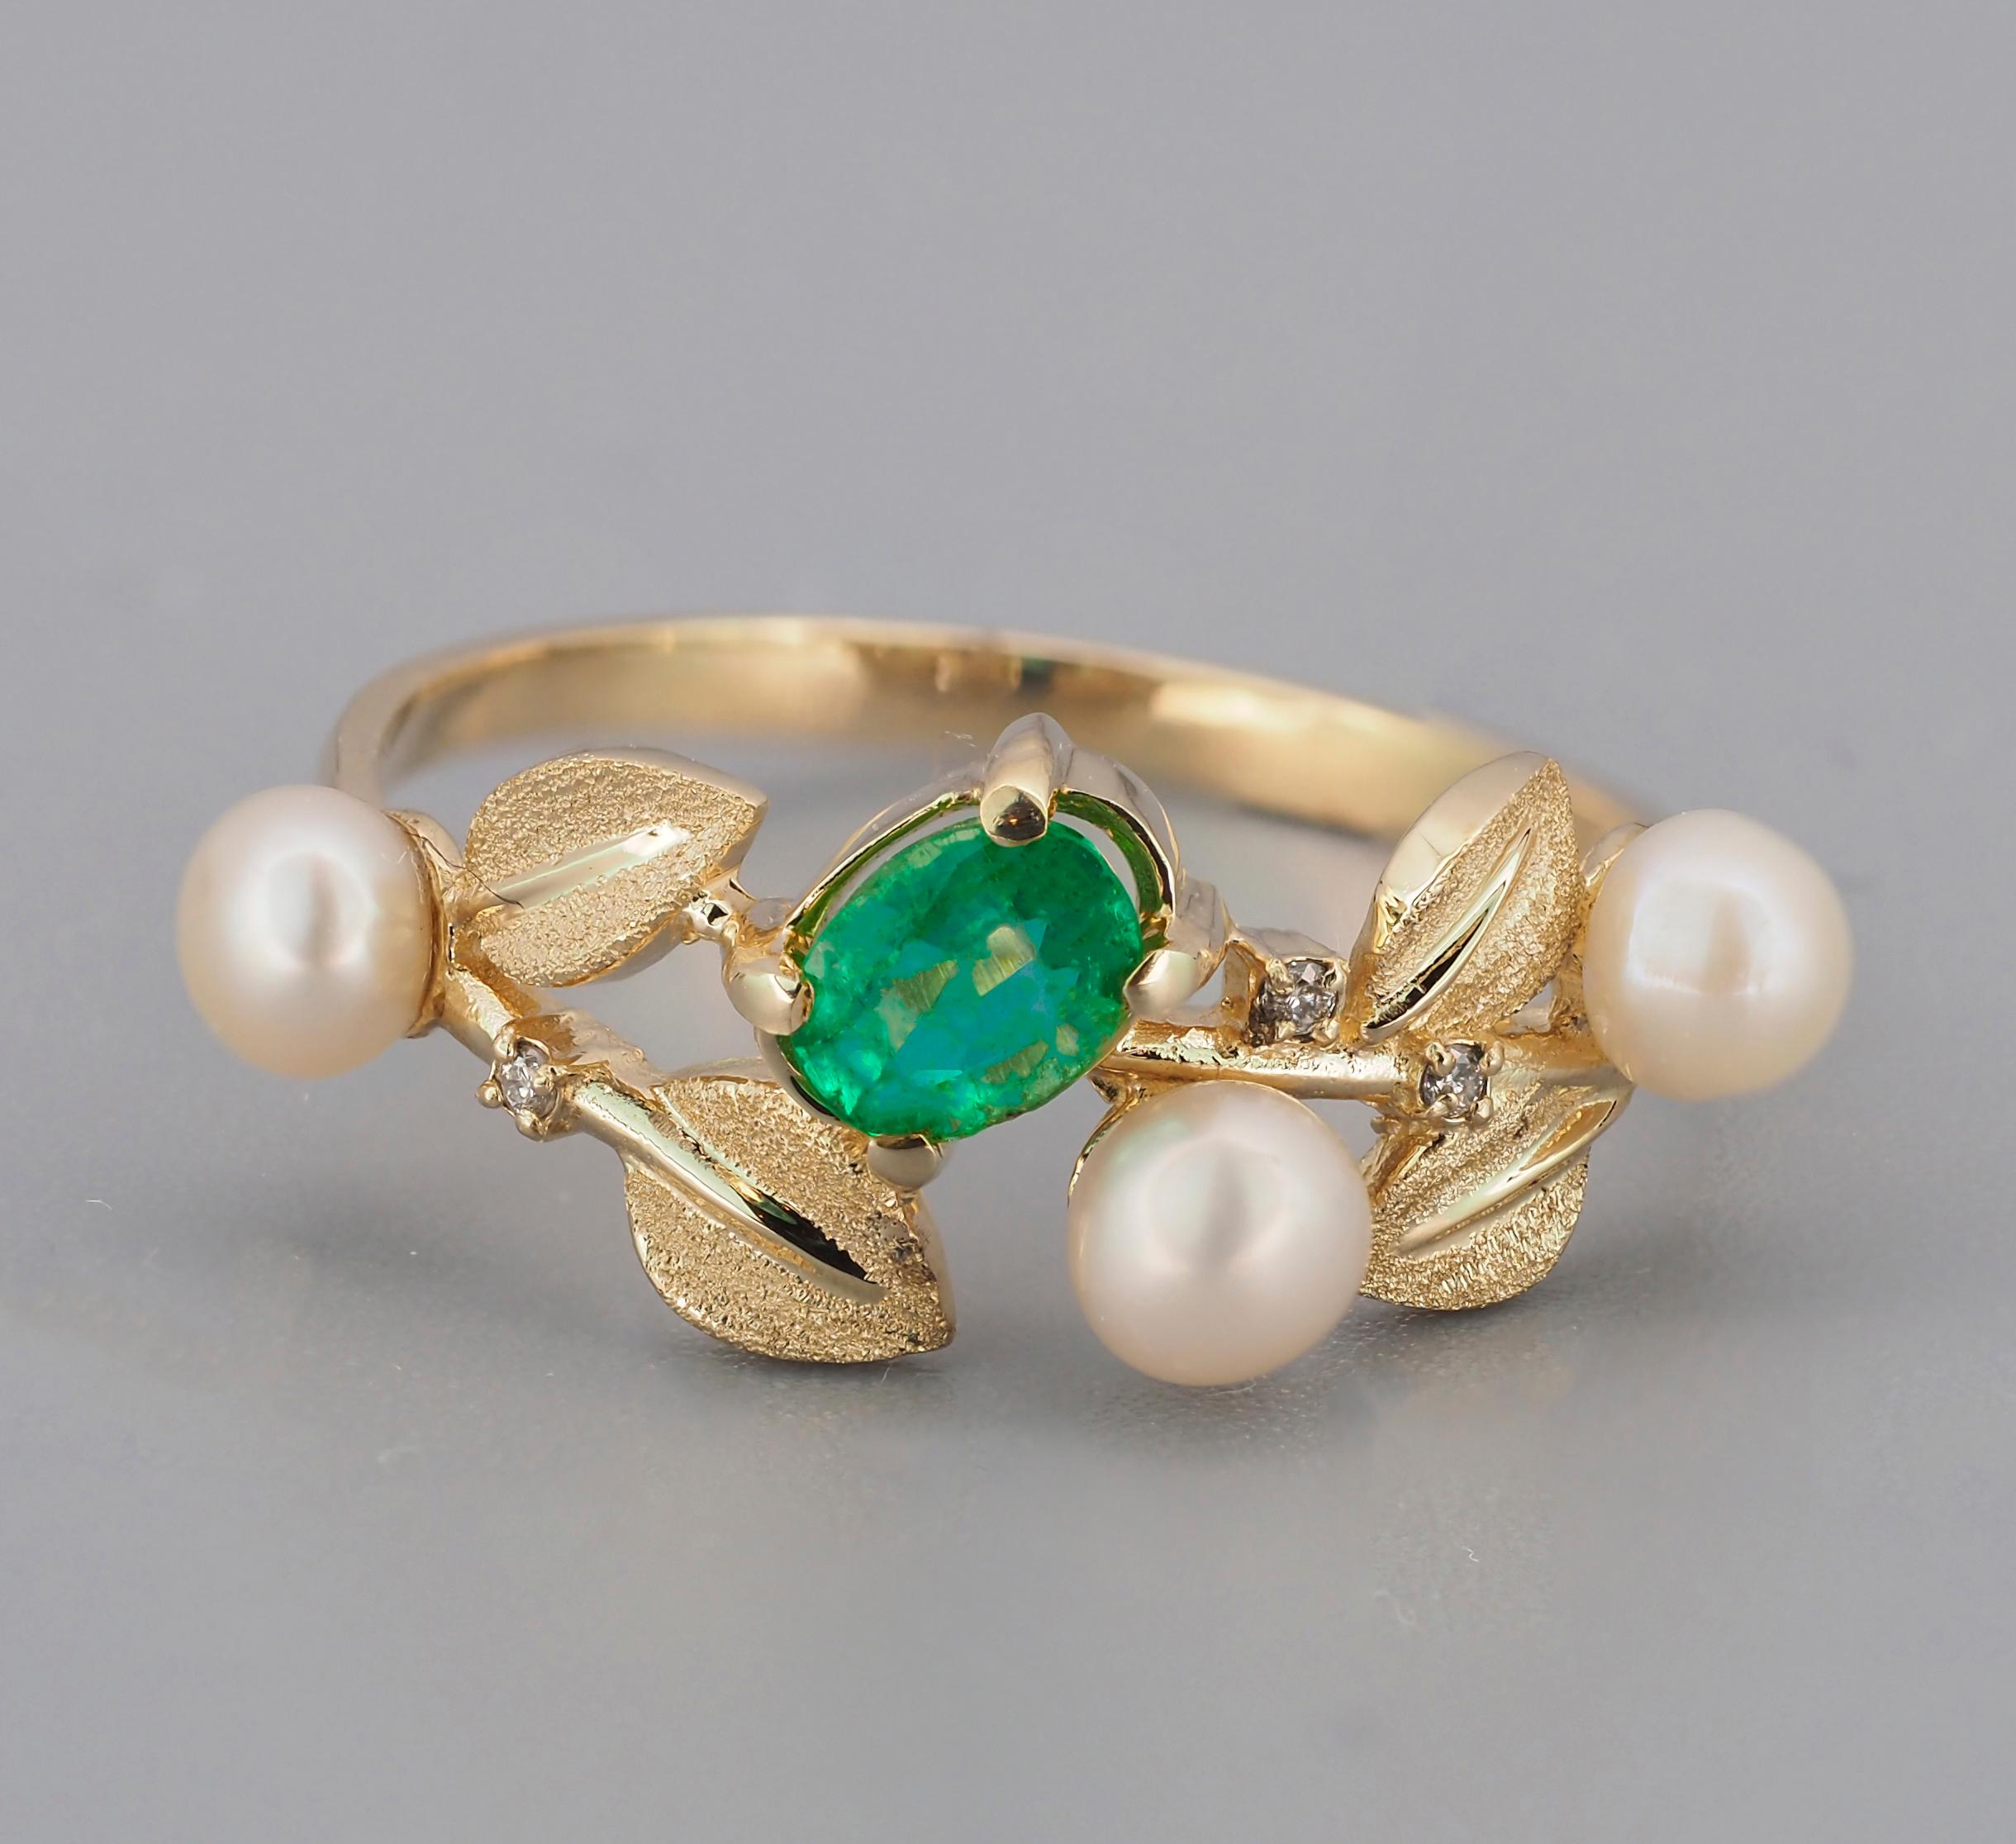 For Sale:  14k Gold Ring with Emerald, Pearls and Diamonds 2